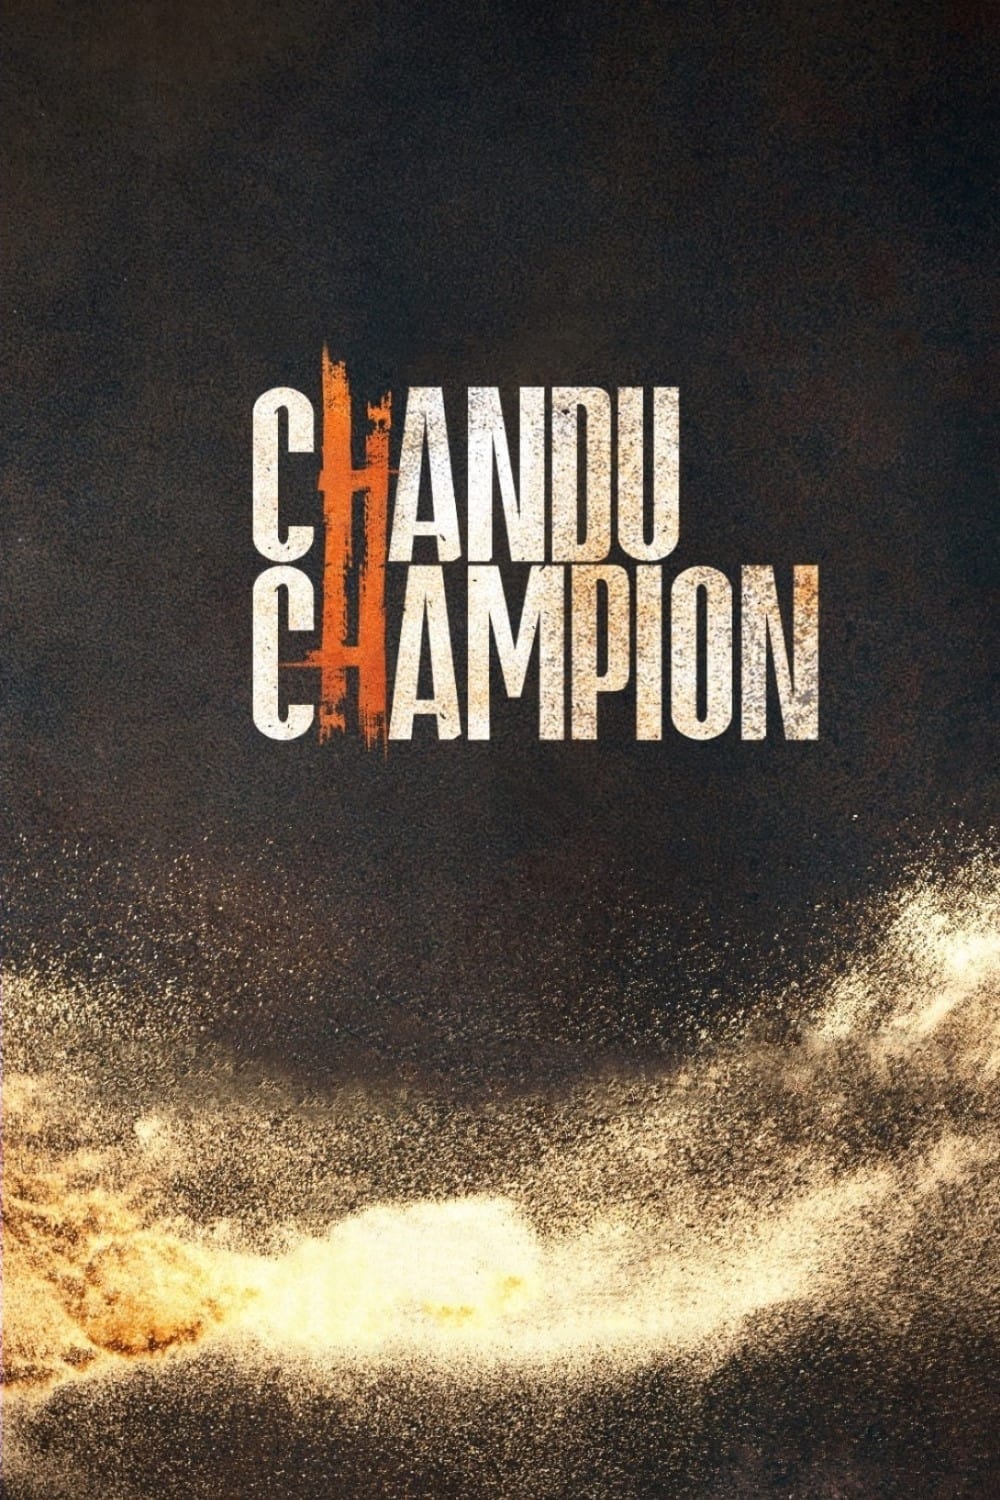 Poster for the movie "Chandu Champion"